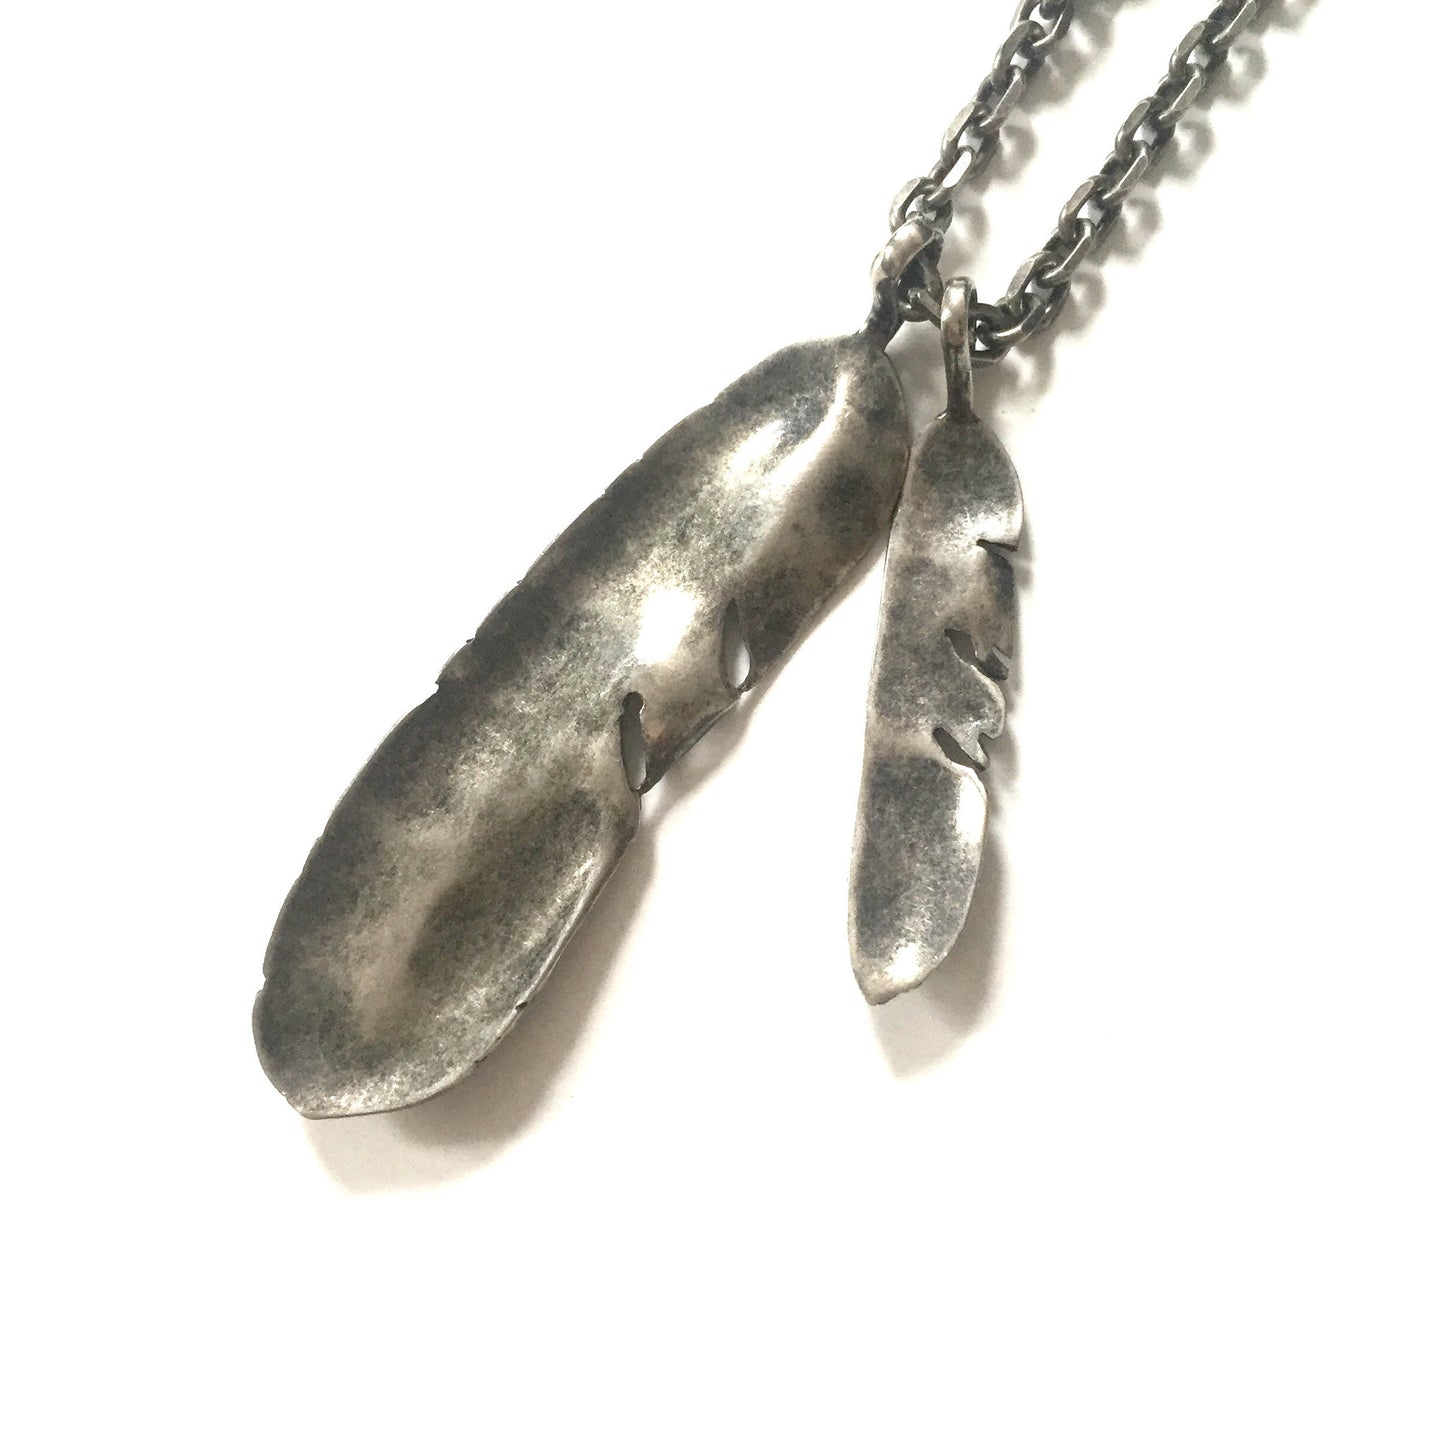 Tom Ford - Silver Feather Pendant Chain Necklace